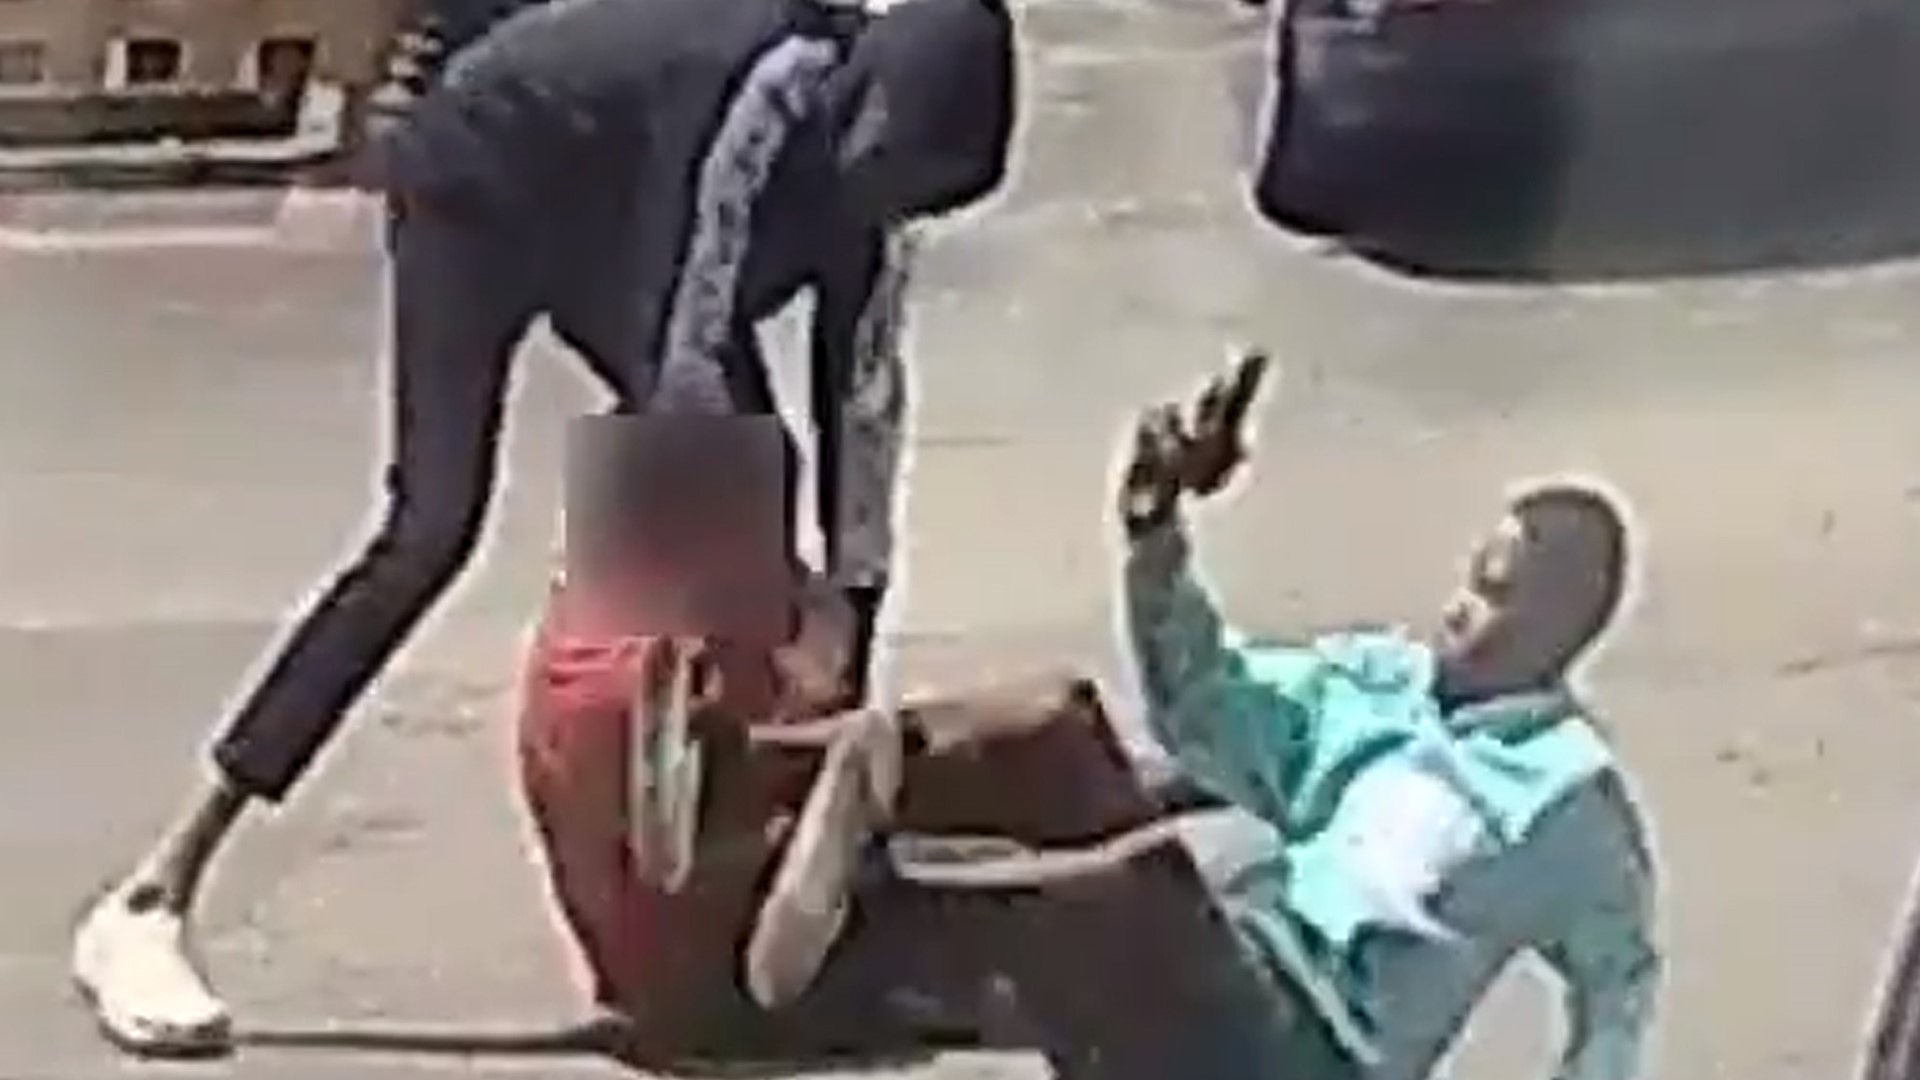 The victim tried to back away from them, so the suspects followed and started attacking.